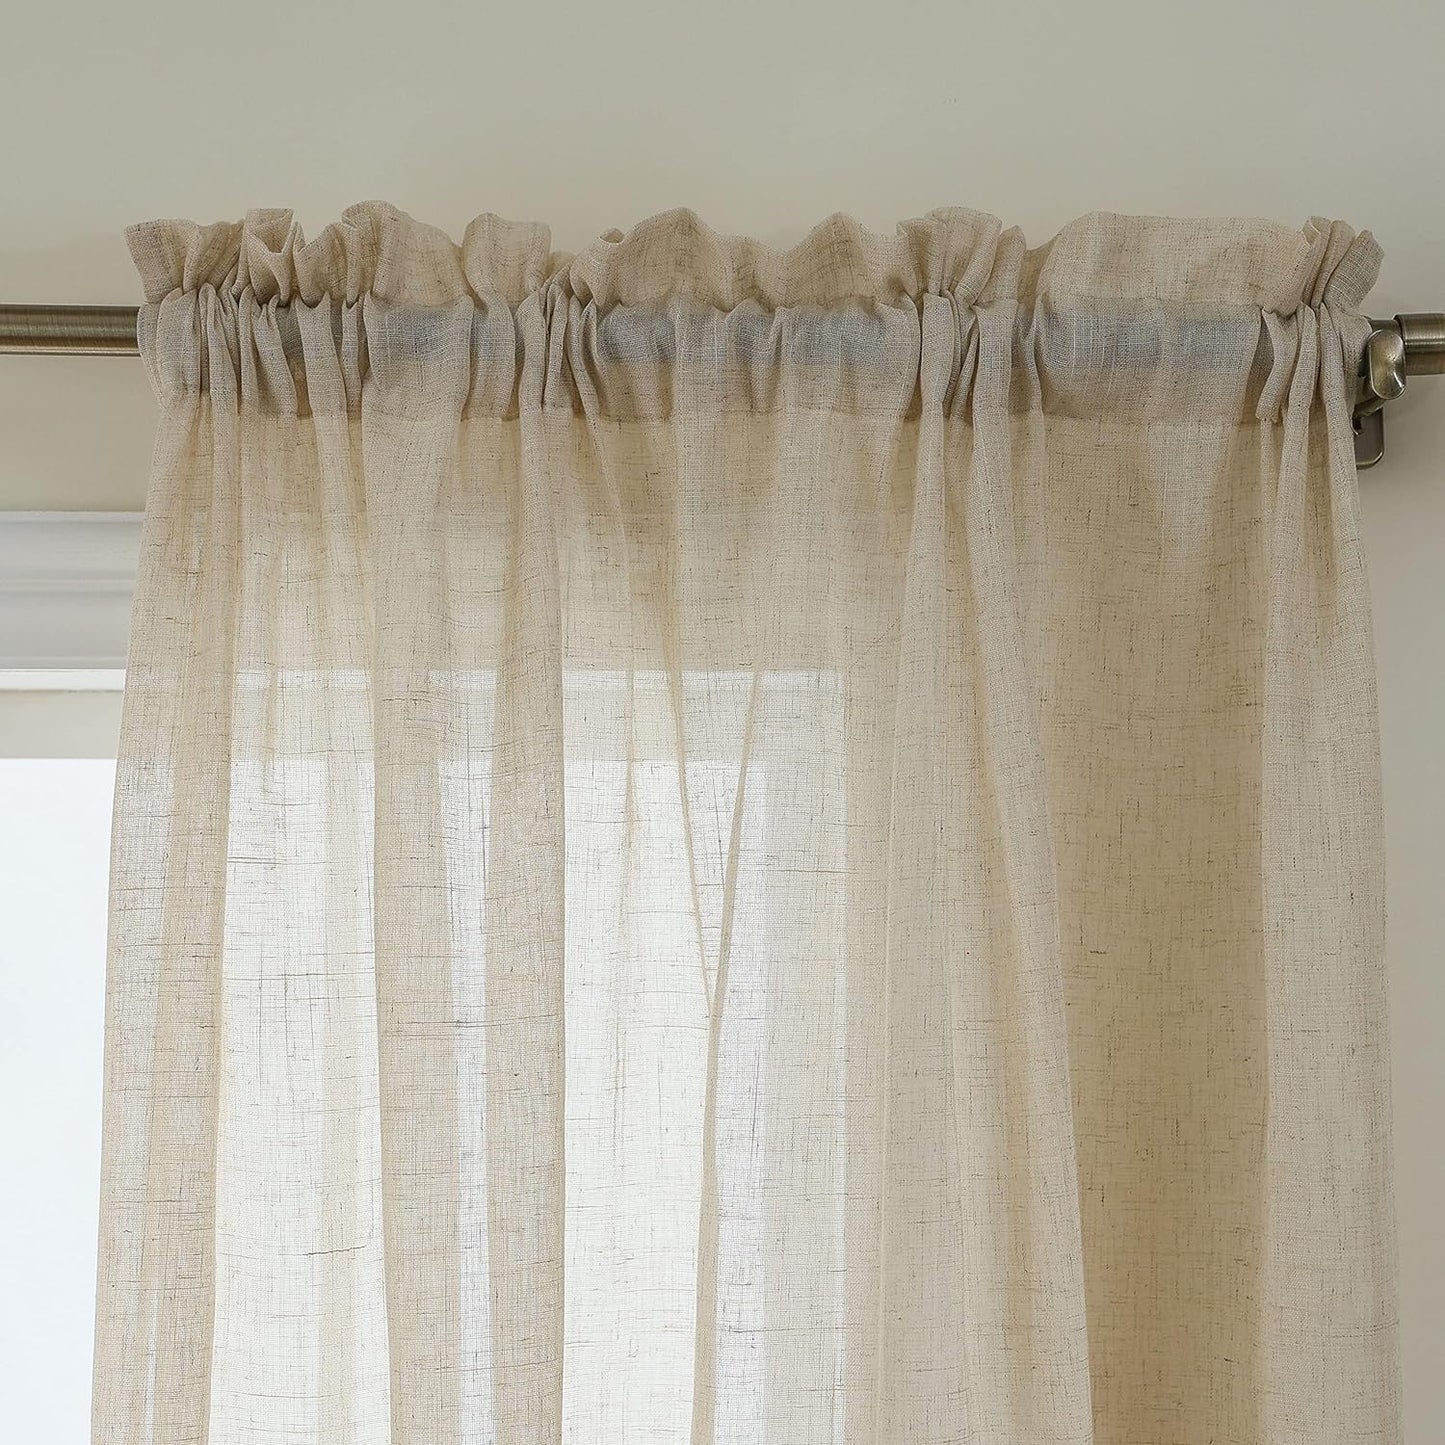 Demetex Sheer Linen Curtains 72 Inches Long Natrual Semi Sheer Curtain Decorative Panels for Living Room Bedroom Porch Window Dressing, 54 X 72 Inches, 2 Pieces, Beige  Demetex   